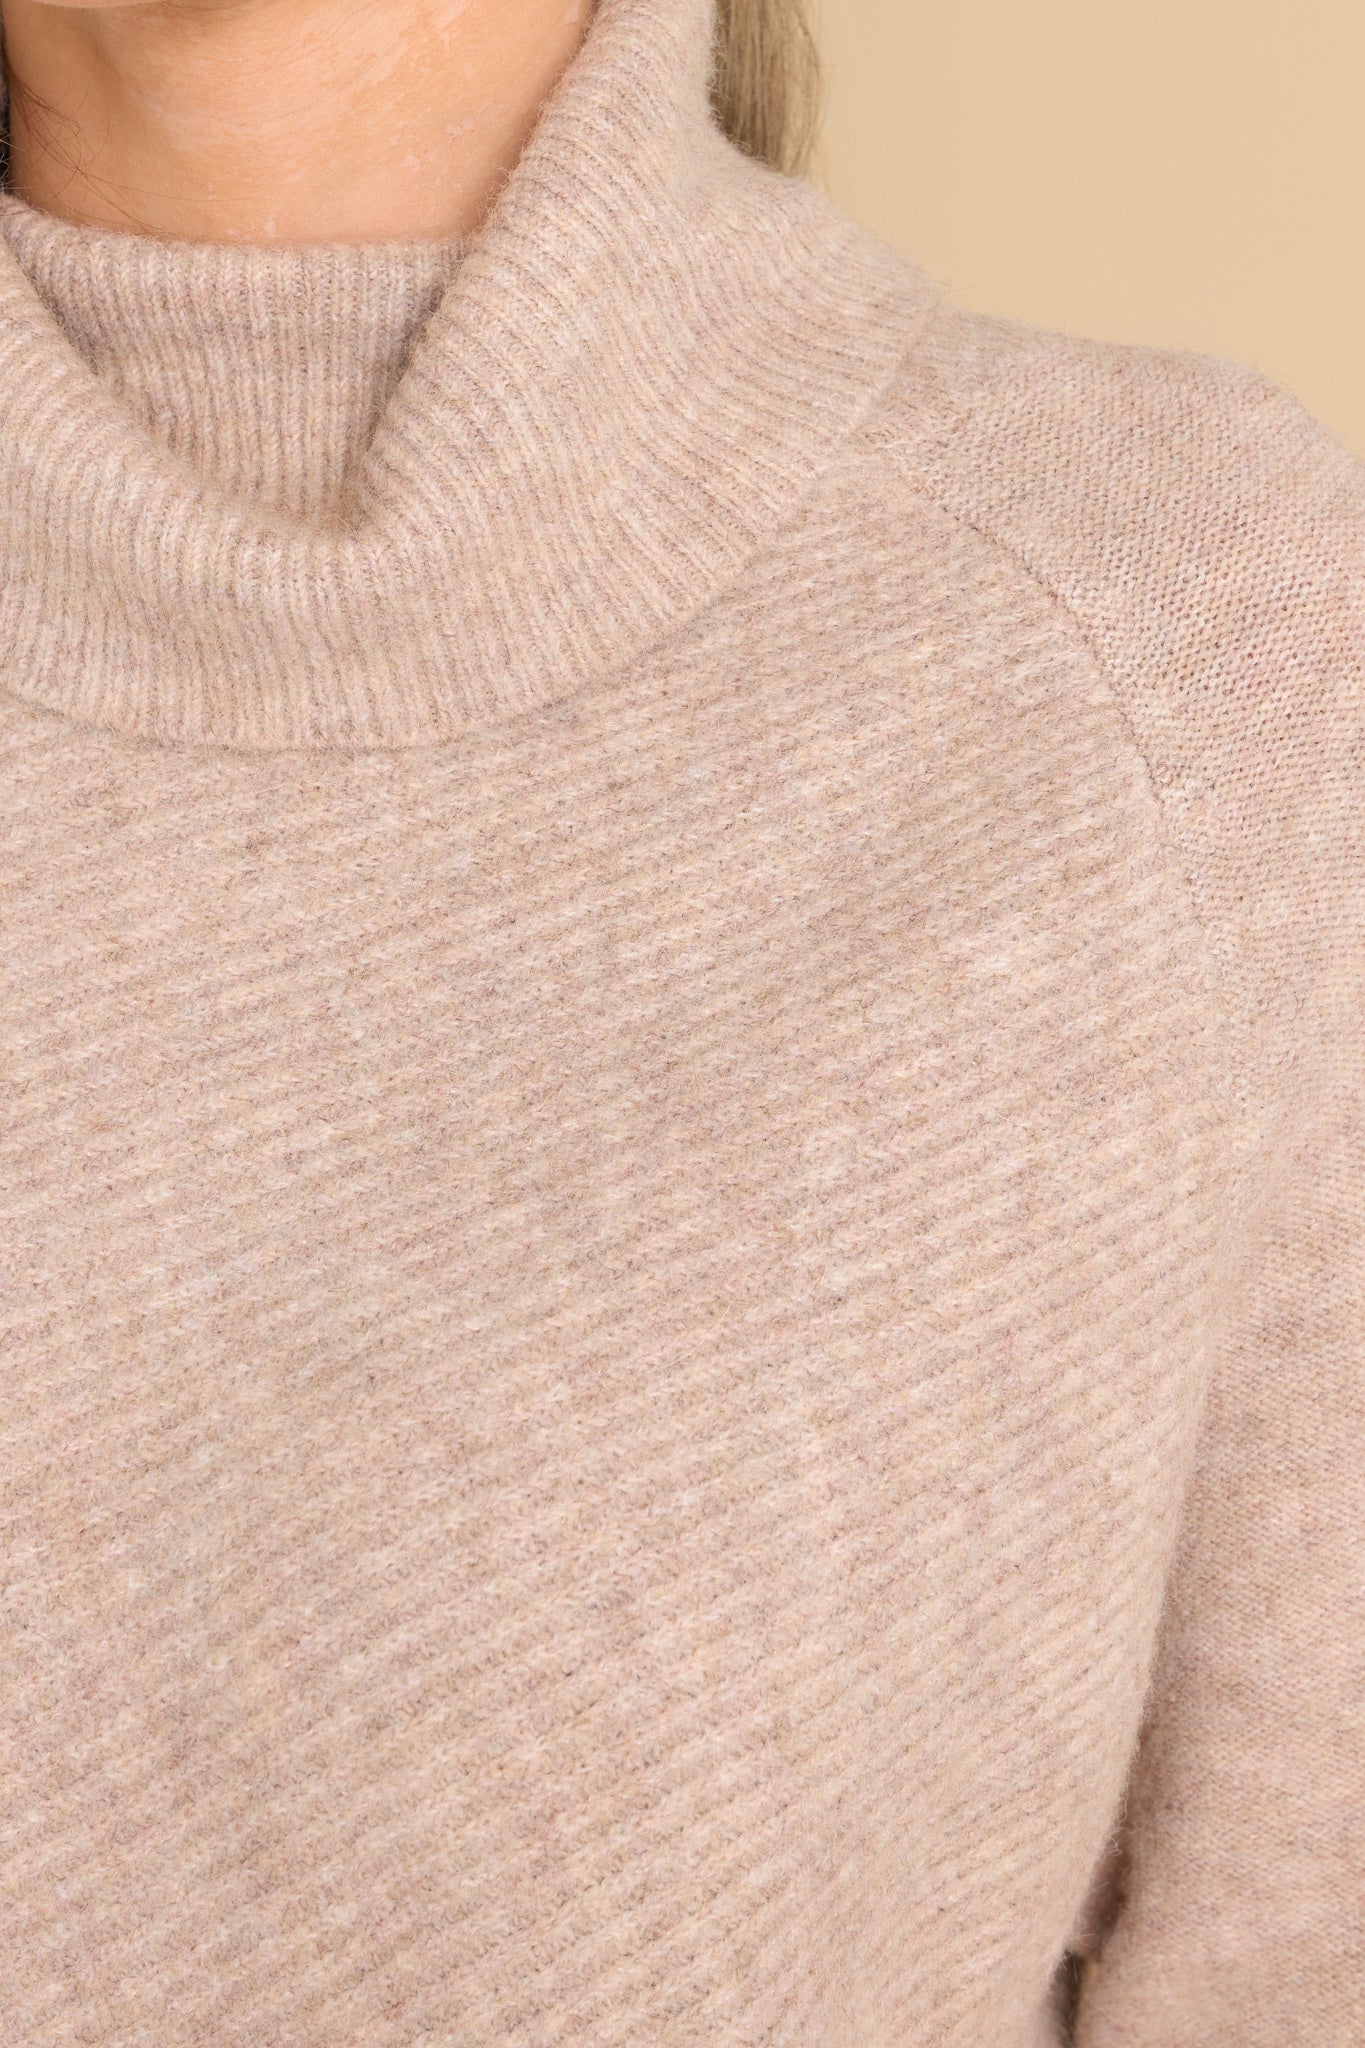 So Unbothered Light Mocha Sweater